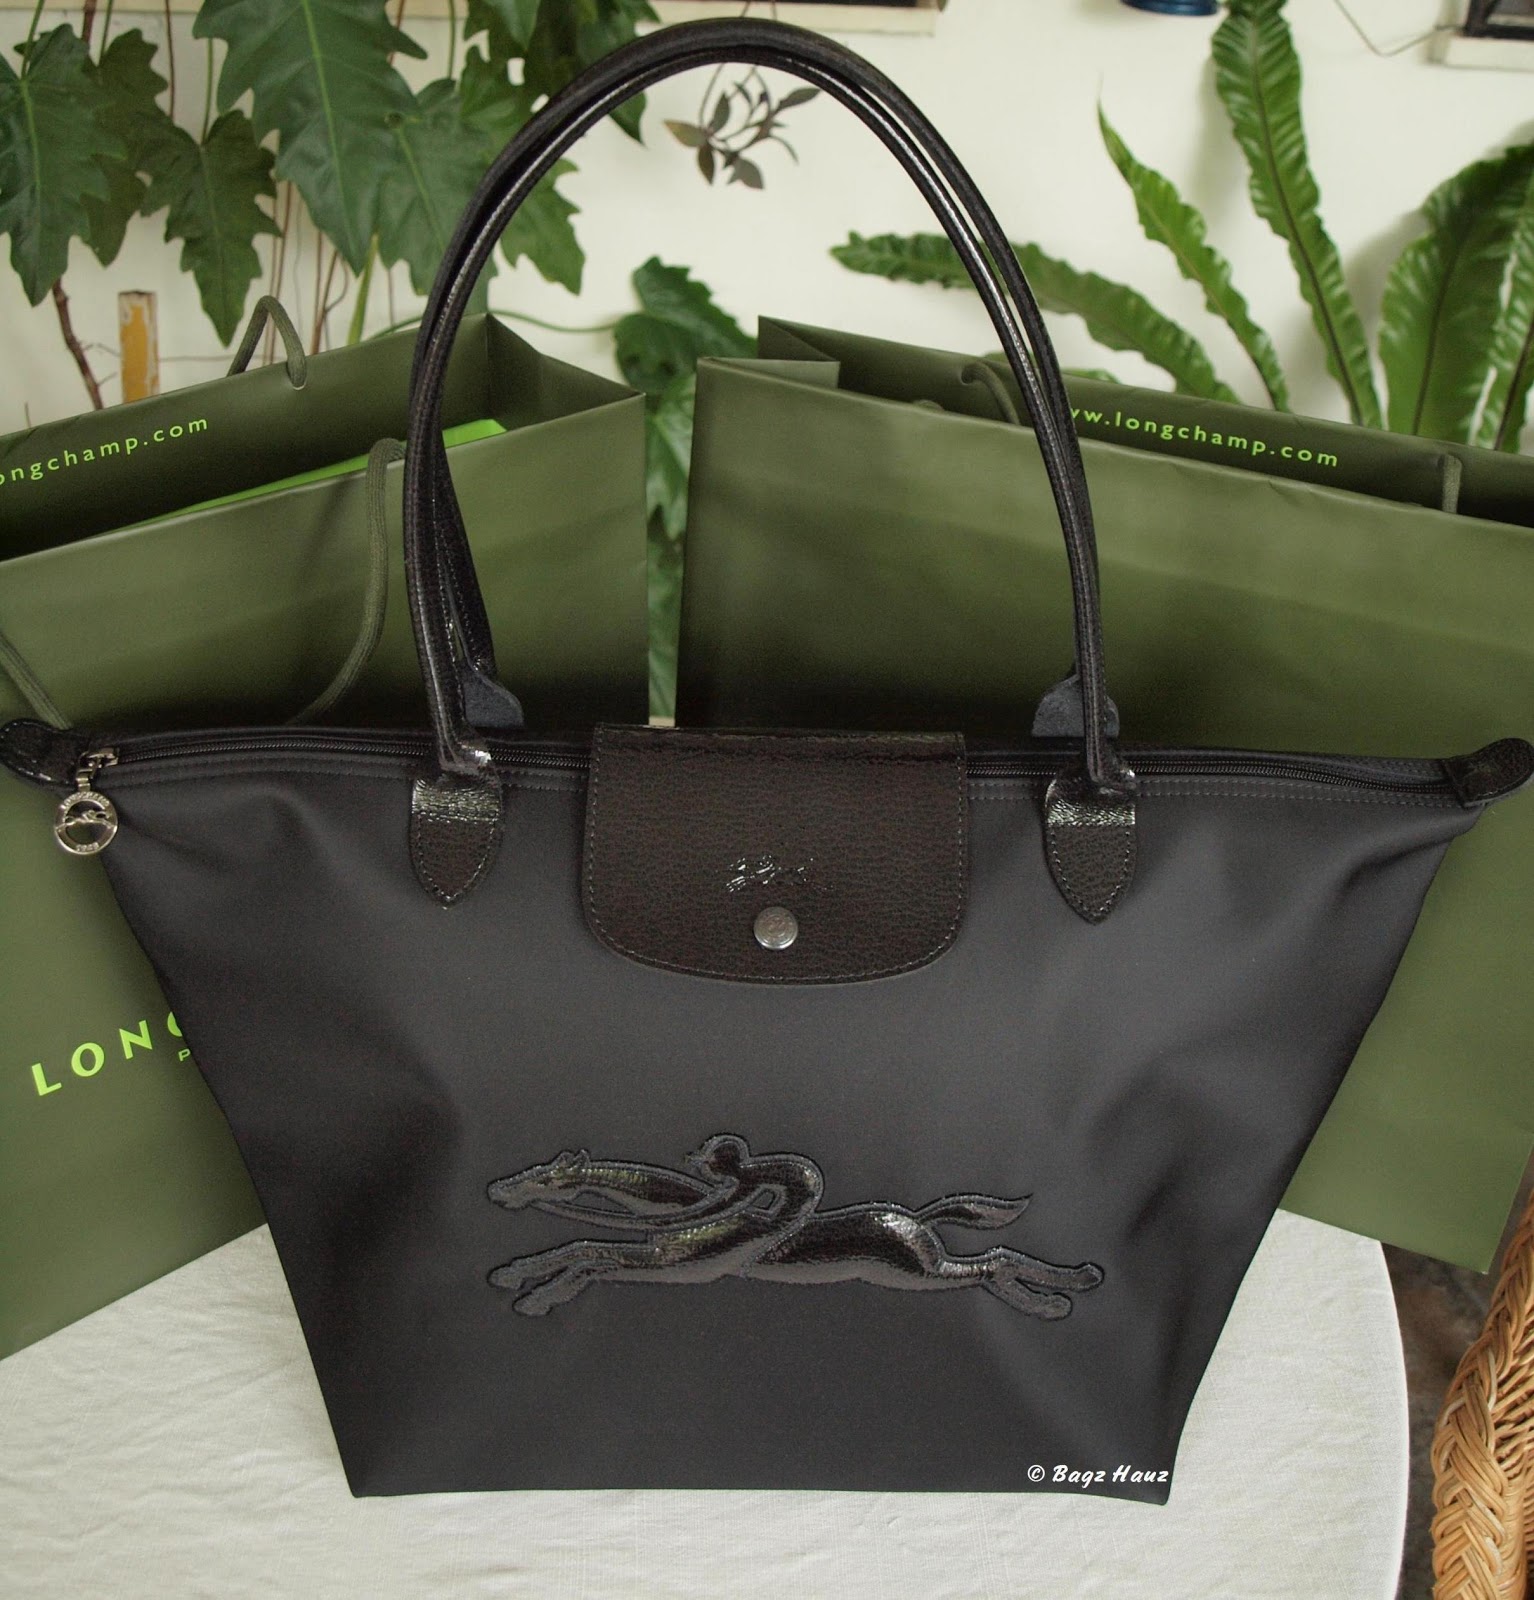 LONGCHAMP Victoire Tote in Black - **SOLD-OUT**